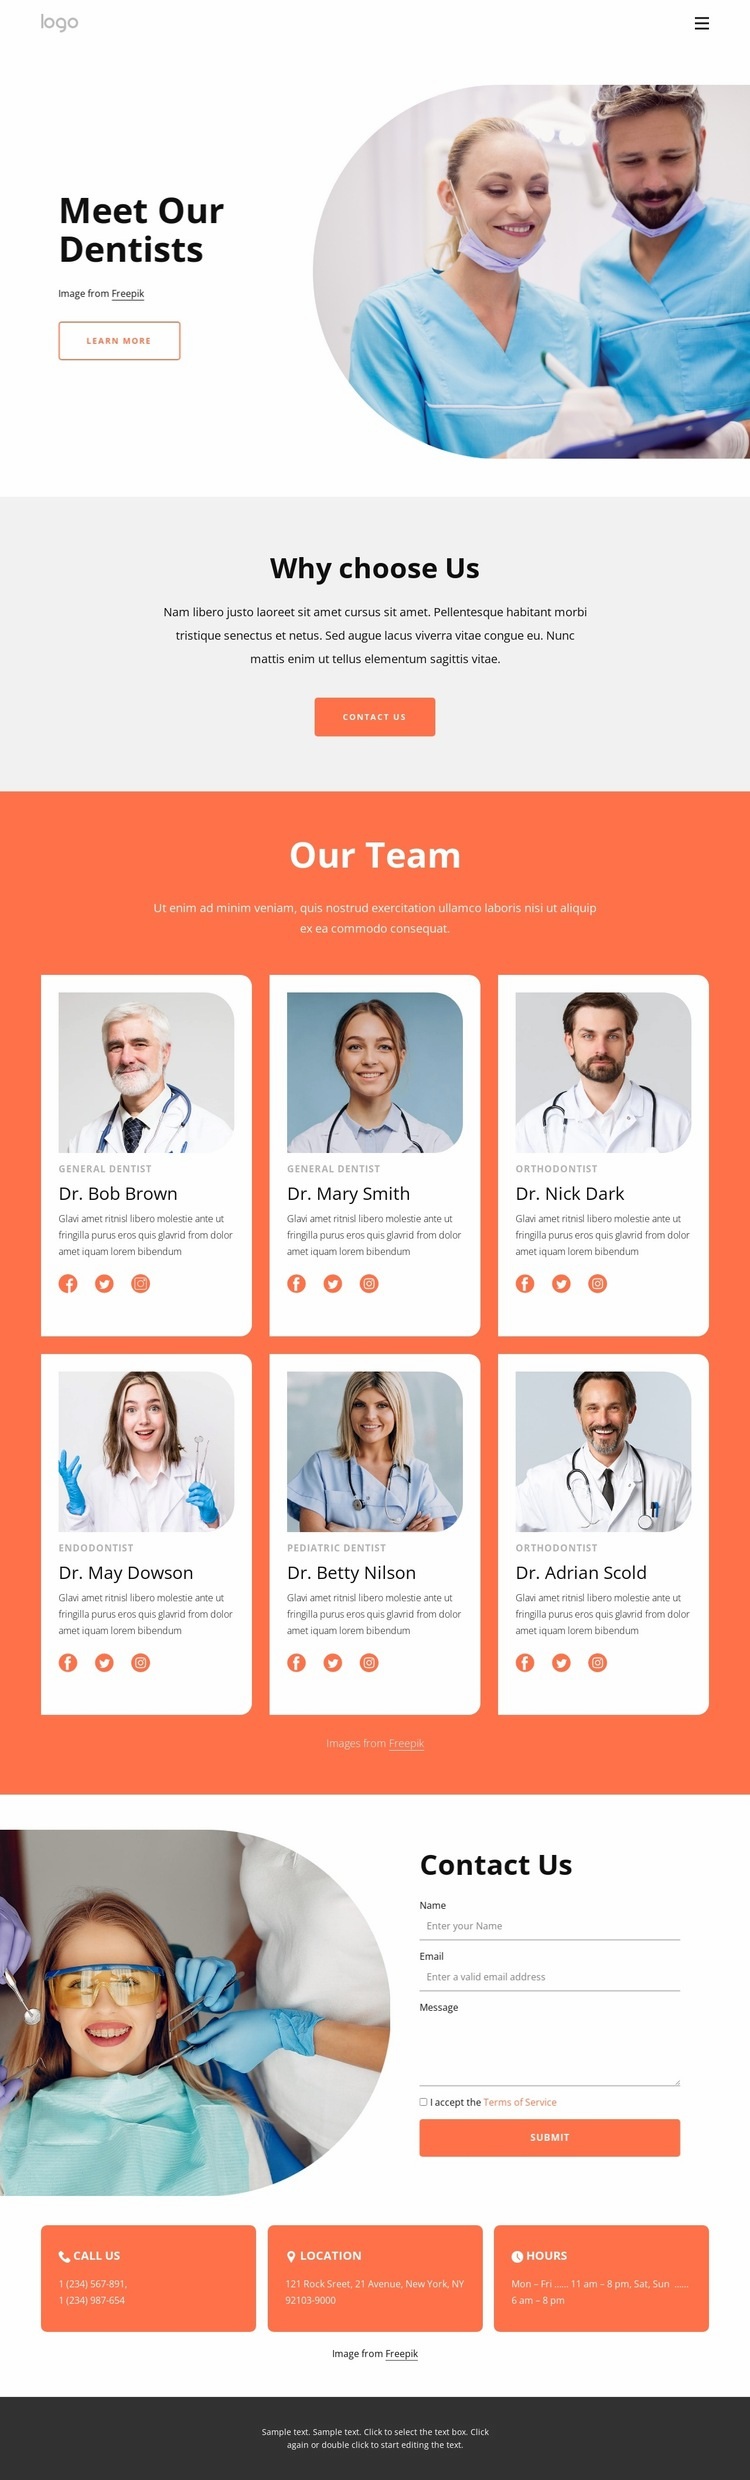 Highly-qualified dentists Squarespace Template Alternative